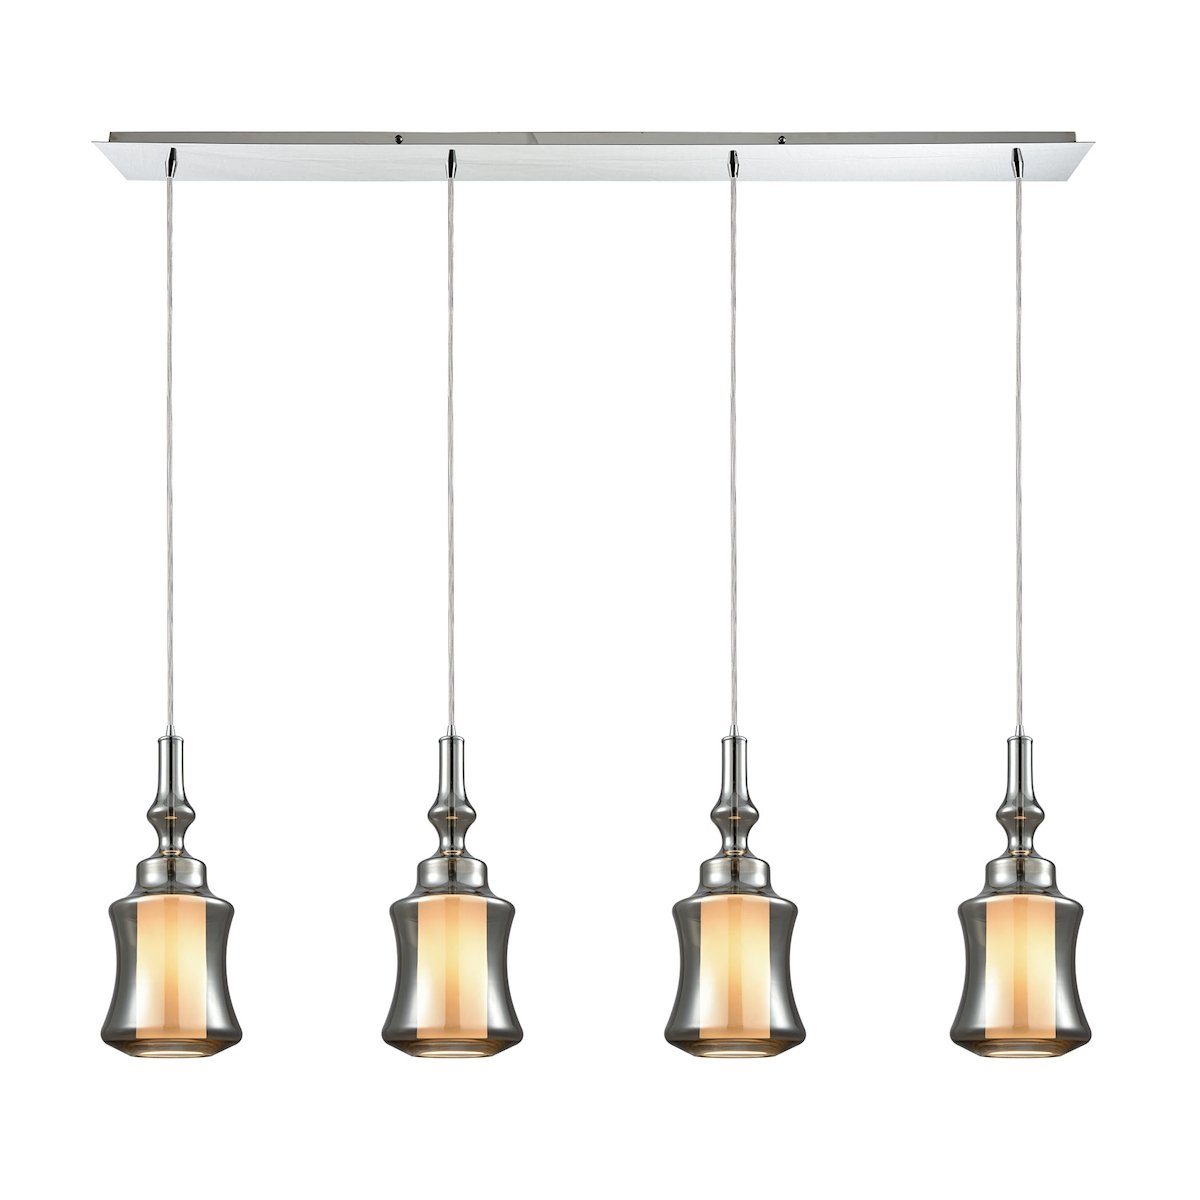 Alora 4 Light Linear Pan Pendant In Polished Chrome With Opal White Glass Inside Smoke Plated Glass Ceiling Elk Lighting 